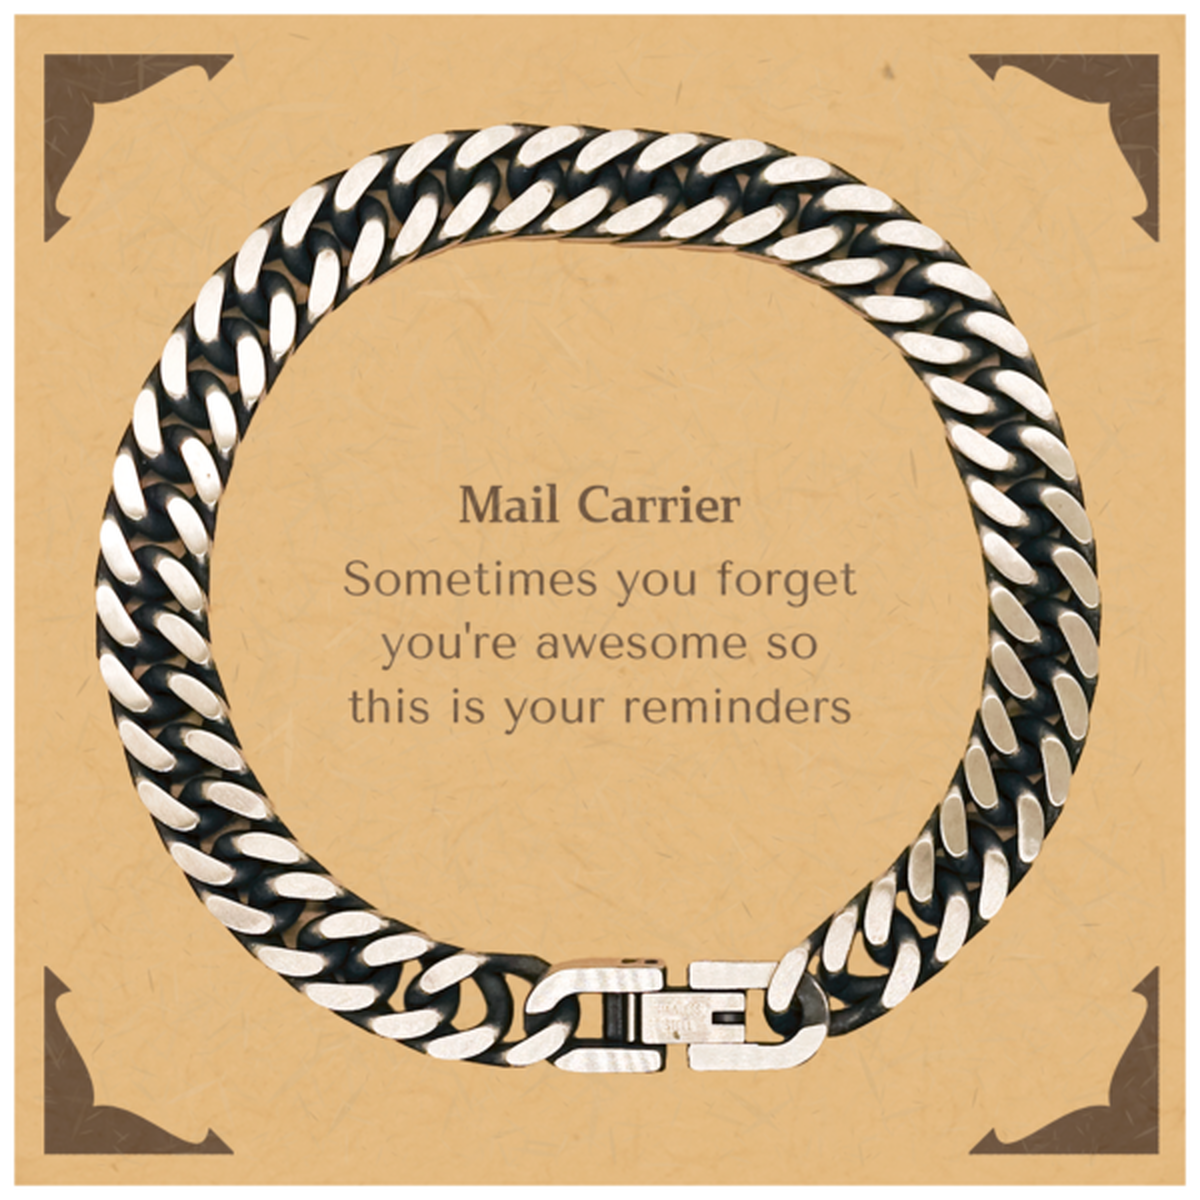 Sentimental Mail Carrier Cuban Link Chain Bracelet, Mail Carrier Sometimes you forget you're awesome so this is your reminders, Graduation Christmas Birthday Gifts for Mail Carrier, Men, Women, Coworkers